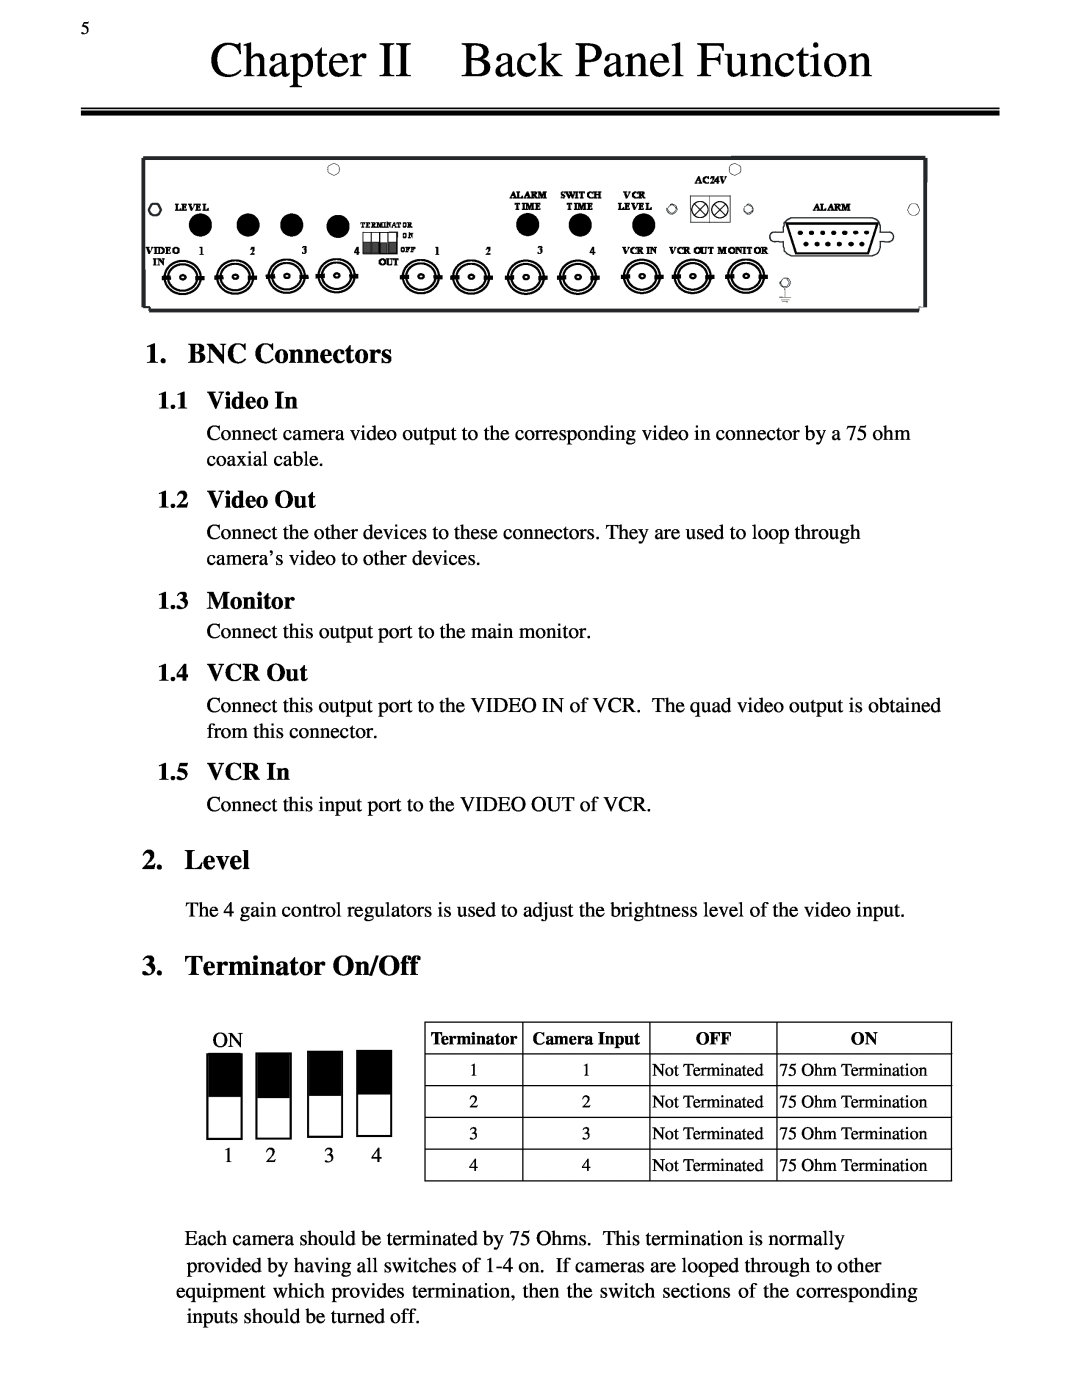 EverFocus 4BQ user manual Chapter II Back Panel Function, BNC Connectors, Level, Terminator On/Off 